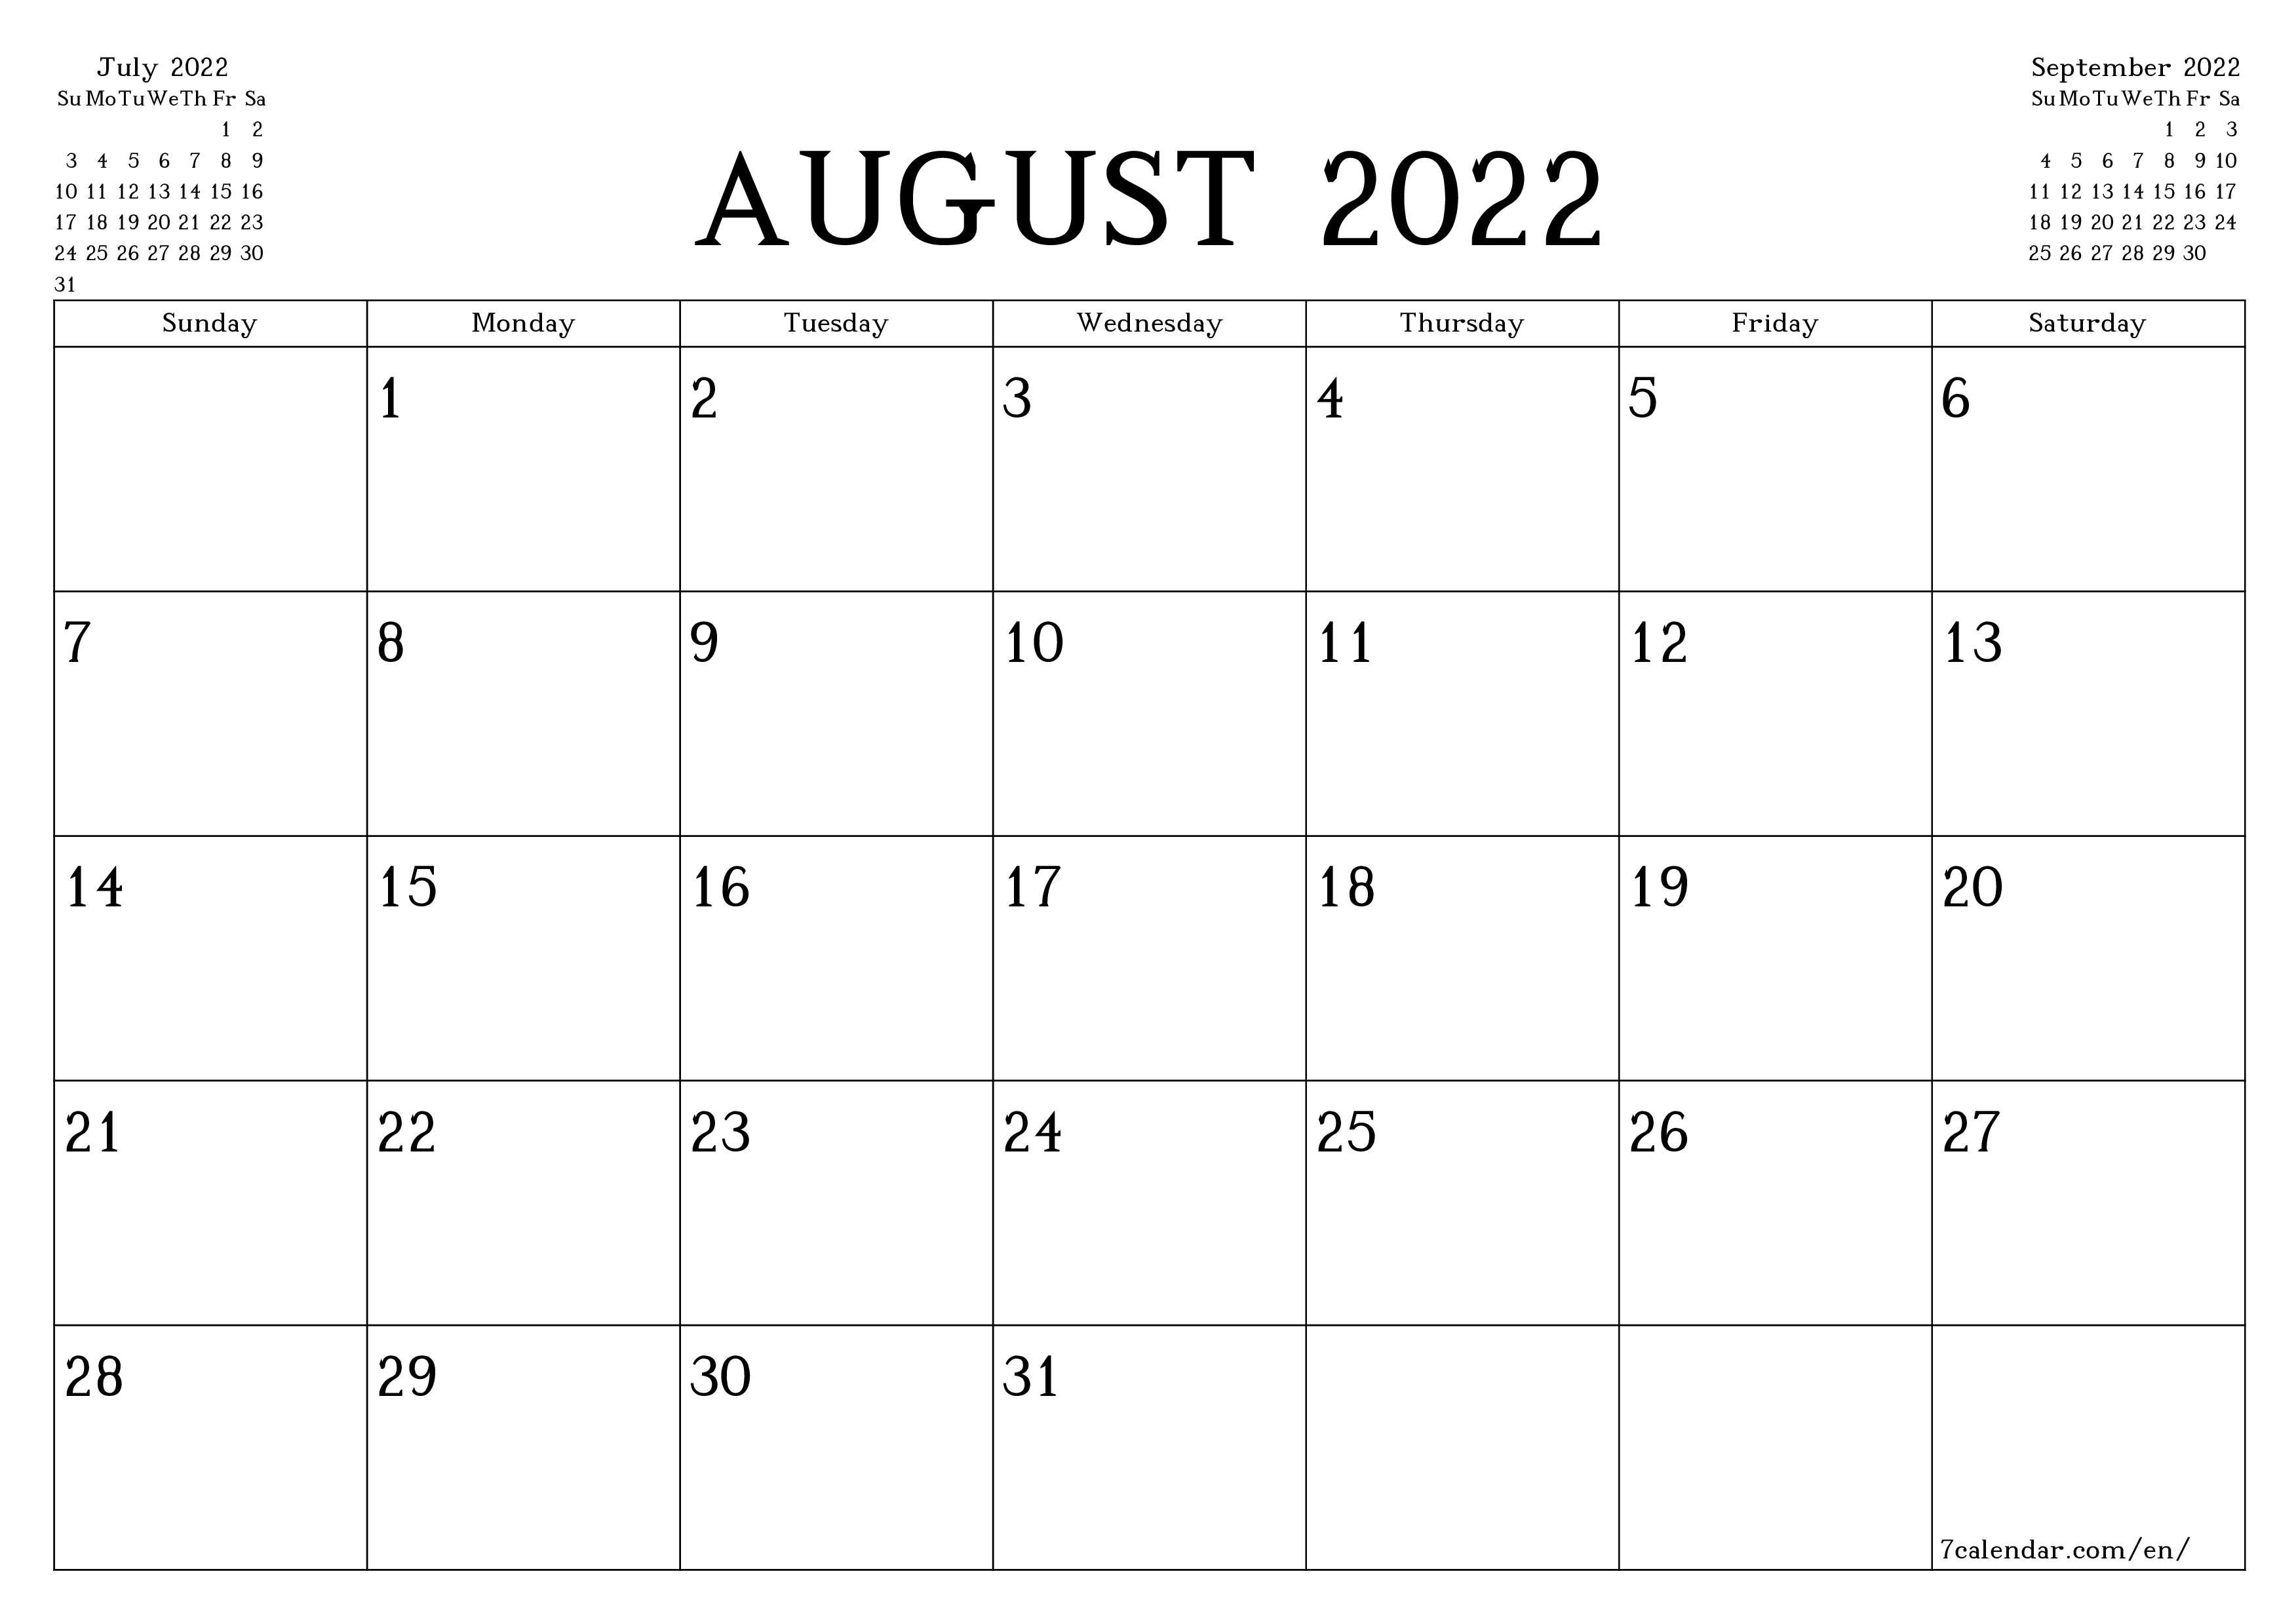 Monthly Calendar 2022 August August 2022 Free Printable Calendars And Planners, Pdf Templates - 7Calendar